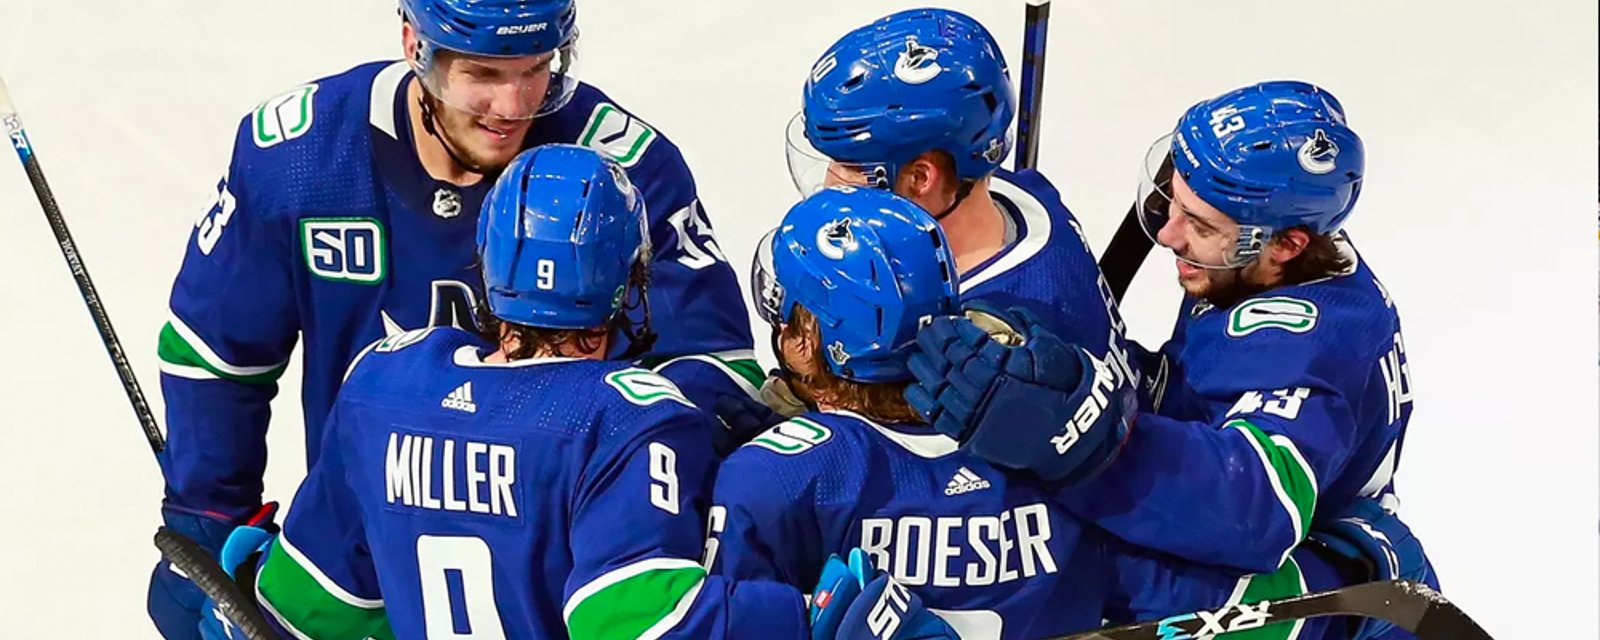 Report: Canucks were the “driving force” behind cancellation of NHL games this evening